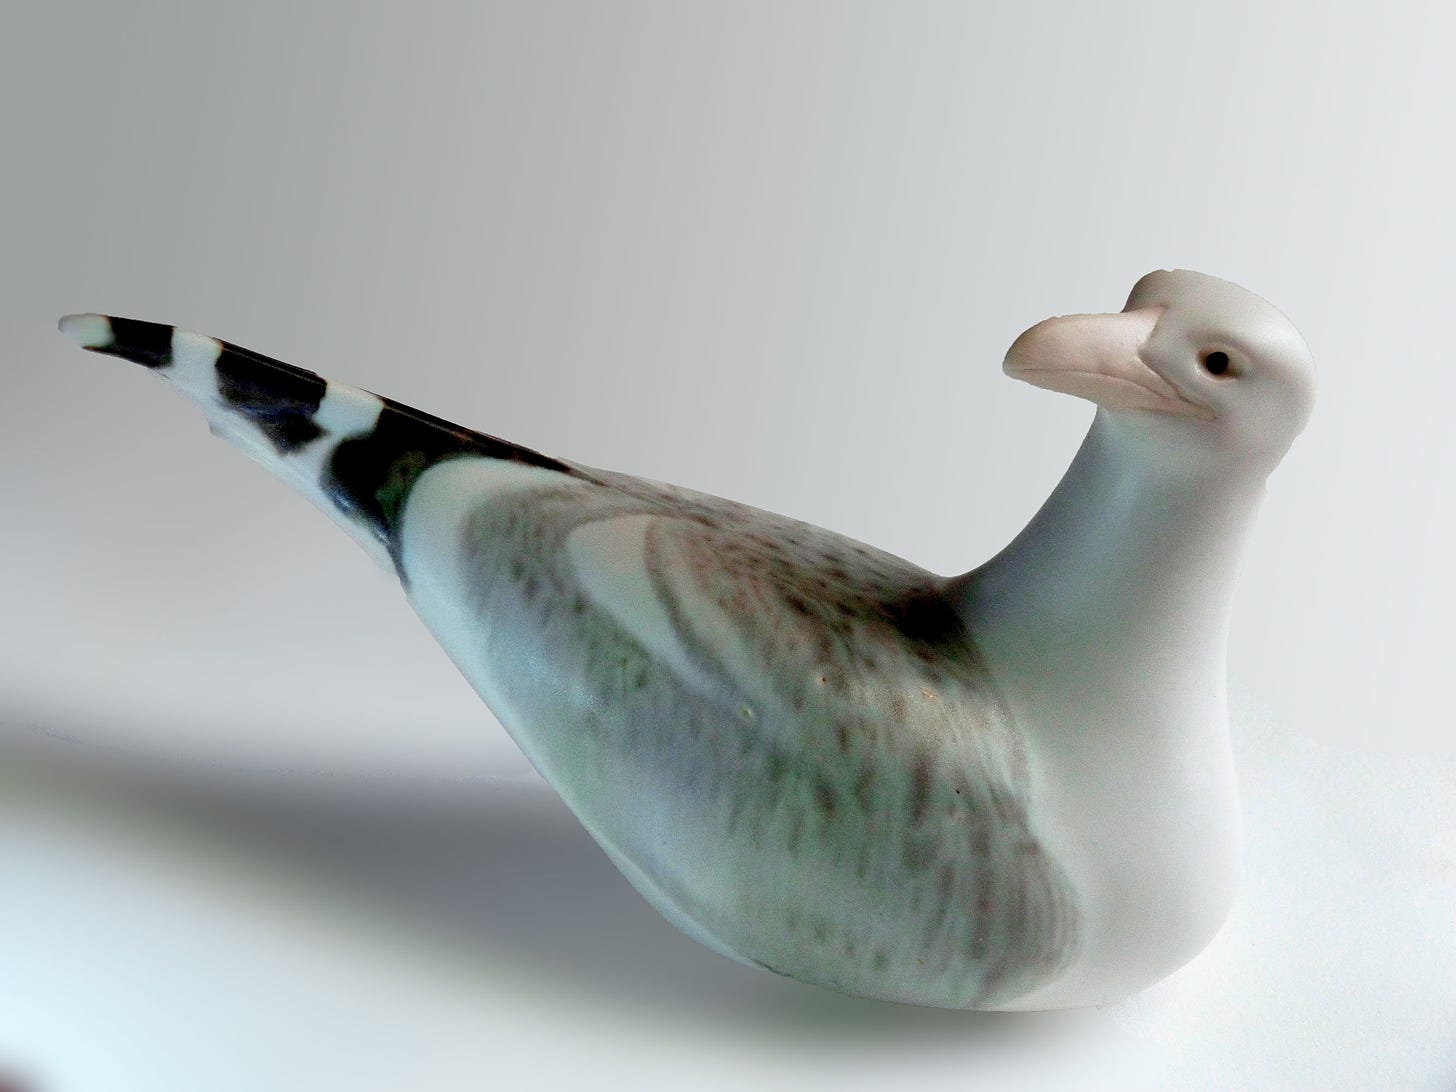 Slip cast seagull turns it head. looking back towards it's uplifted rail. Its eyes are hollowed out ovals creating an inner depth. The beak is unglazed. The rest of the form id lazed in white matte with a fluid interactive gray decorating color painted across the wings and black ebony and white matte stripes grace the tail feathers.